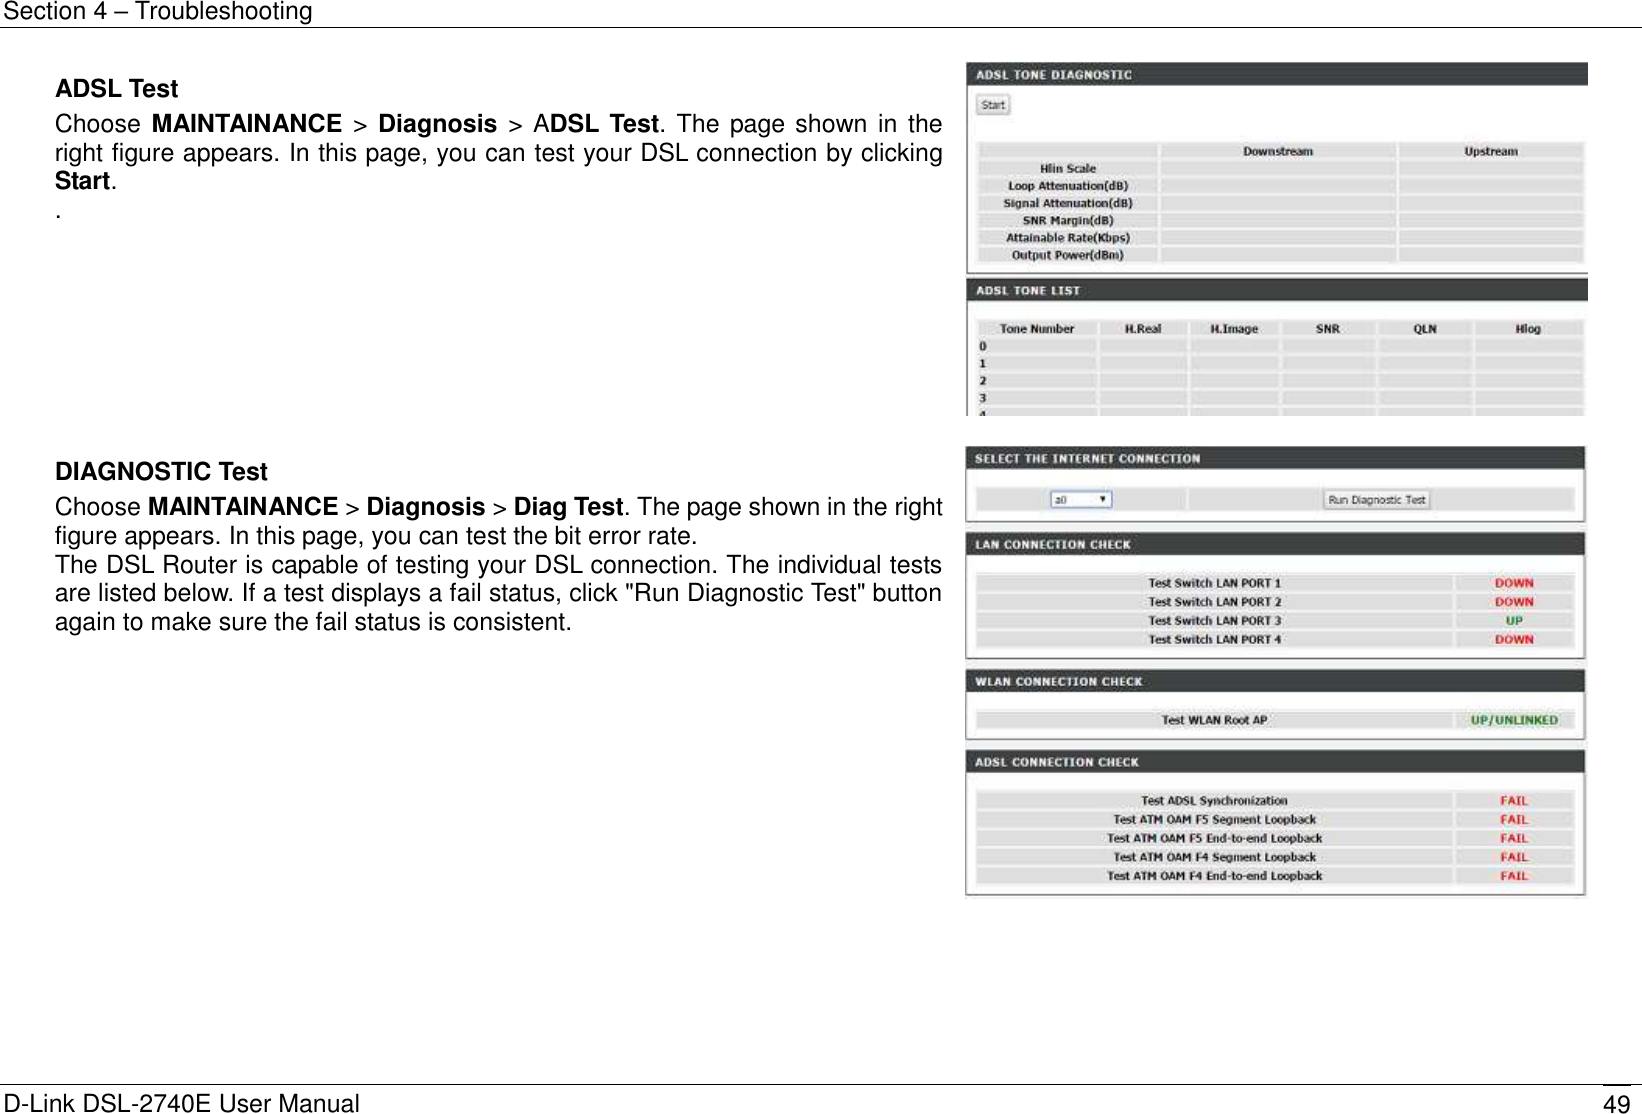 Section 4 – Troubleshooting D-Link DSL-2740E User Manual 49 ADSL Test Choose MAINTAINANCE &gt; Diagnosis &gt; ADSL Test. The page shown in the right figure appears. In this page, you can test your DSL connection by clicking Start. .   DIAGNOSTIC Test Choose MAINTAINANCE &gt; Diagnosis &gt; Diag Test. The page shown in the right figure appears. In this page, you can test the bit error rate. The DSL Router is capable of testing your DSL connection. The individual tests are listed below. If a test displays a fail status, click &quot;Run Diagnostic Test&quot; button again to make sure the fail status is consistent.  